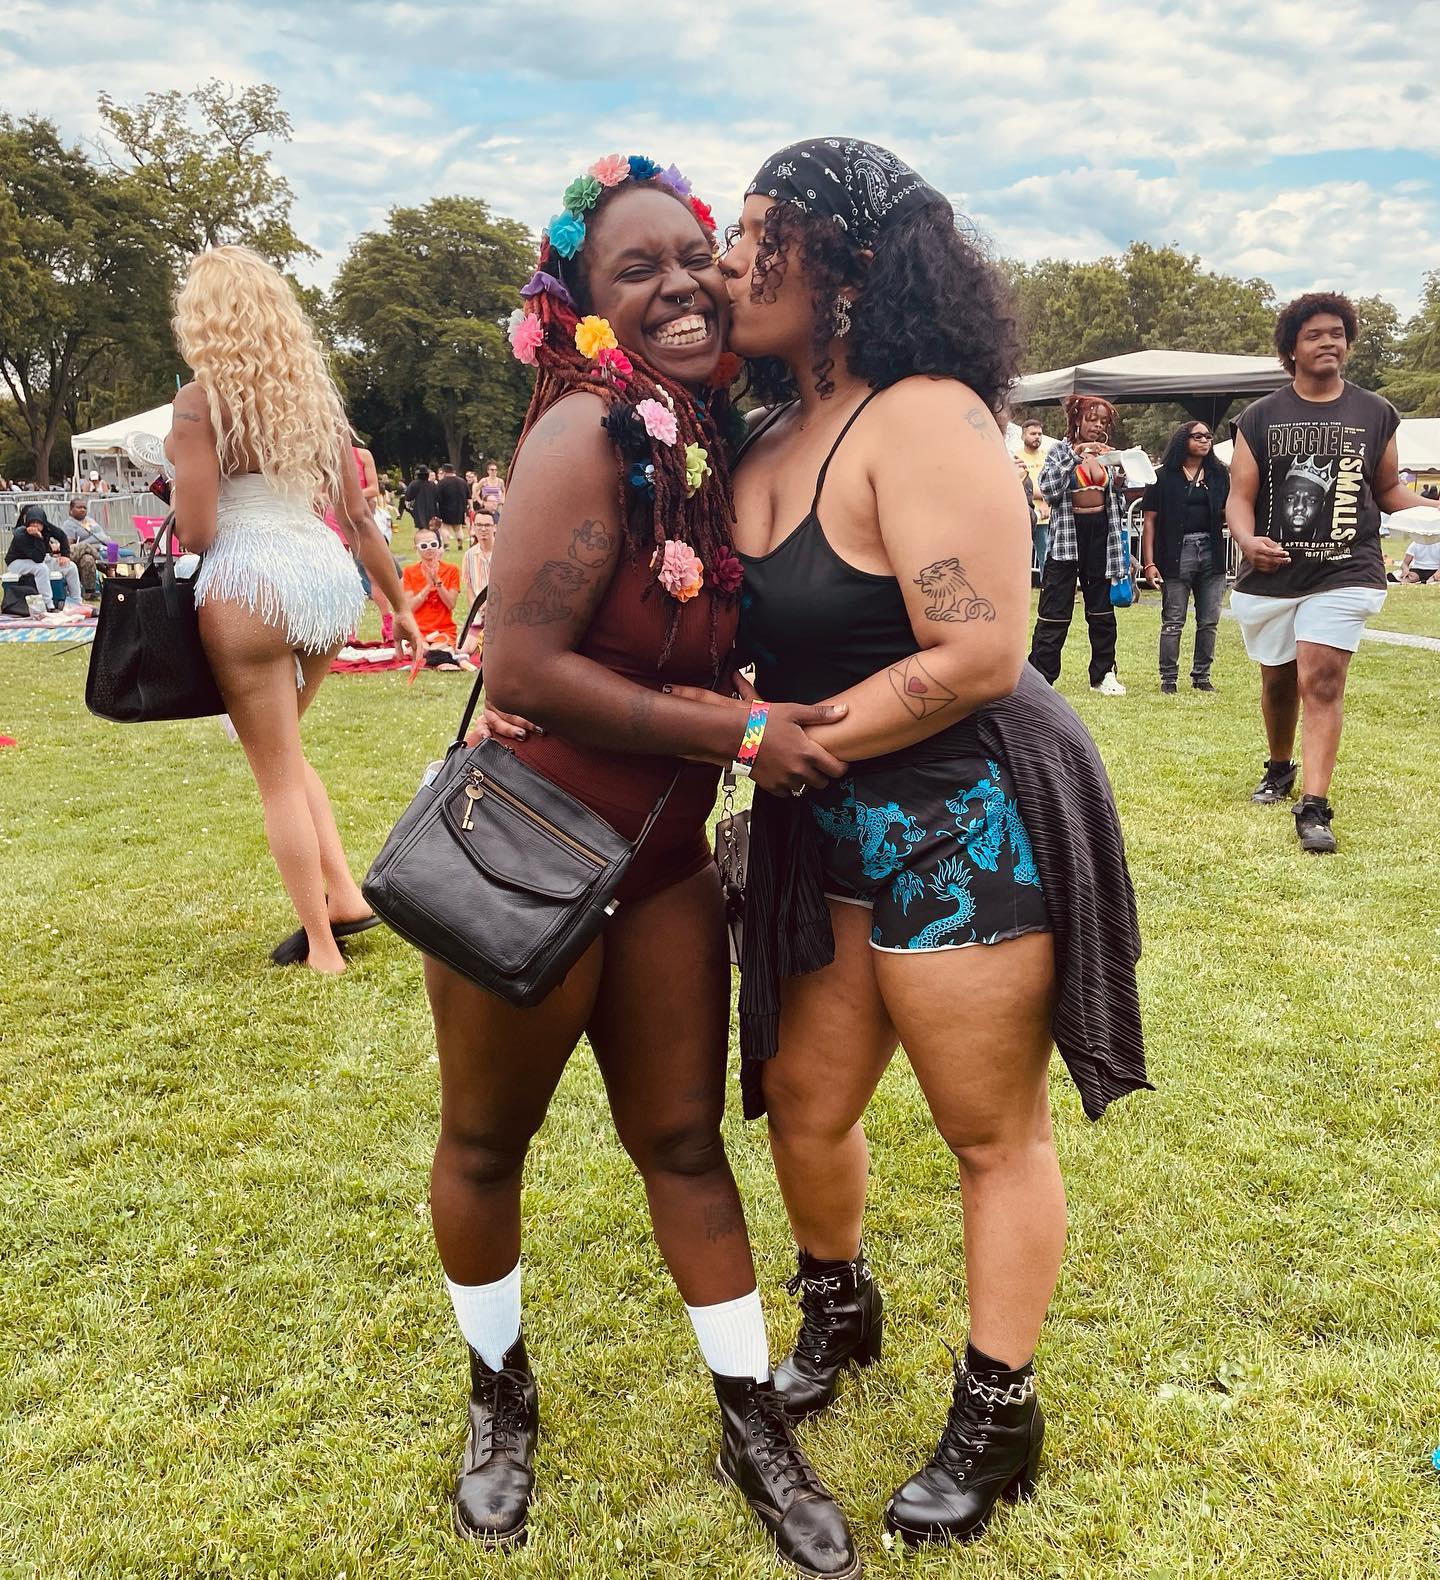 Happiness is when I’m with you 🥰 
.
.
We had so much fun watching our sis @jewel_thegem host and perform at @ioov245’s BIPOC Pride! 
.
.
Full weekend recap coming soon (in IG stories 🥰)
.
.
.
📸: @sundayrosegold 💜
.
.
.
#Pisces #PiscesandClassy #albany #albany #albanypride #bipoc #lesbianlove #queer #ioov #lesbians #queerpride #queerlove #happy #pridemonth #pride #pride🌈 #pride2023 #Blacklove #melanin #rainbow #flowers #flowerhairclips #Afrolatina #Latina #summer